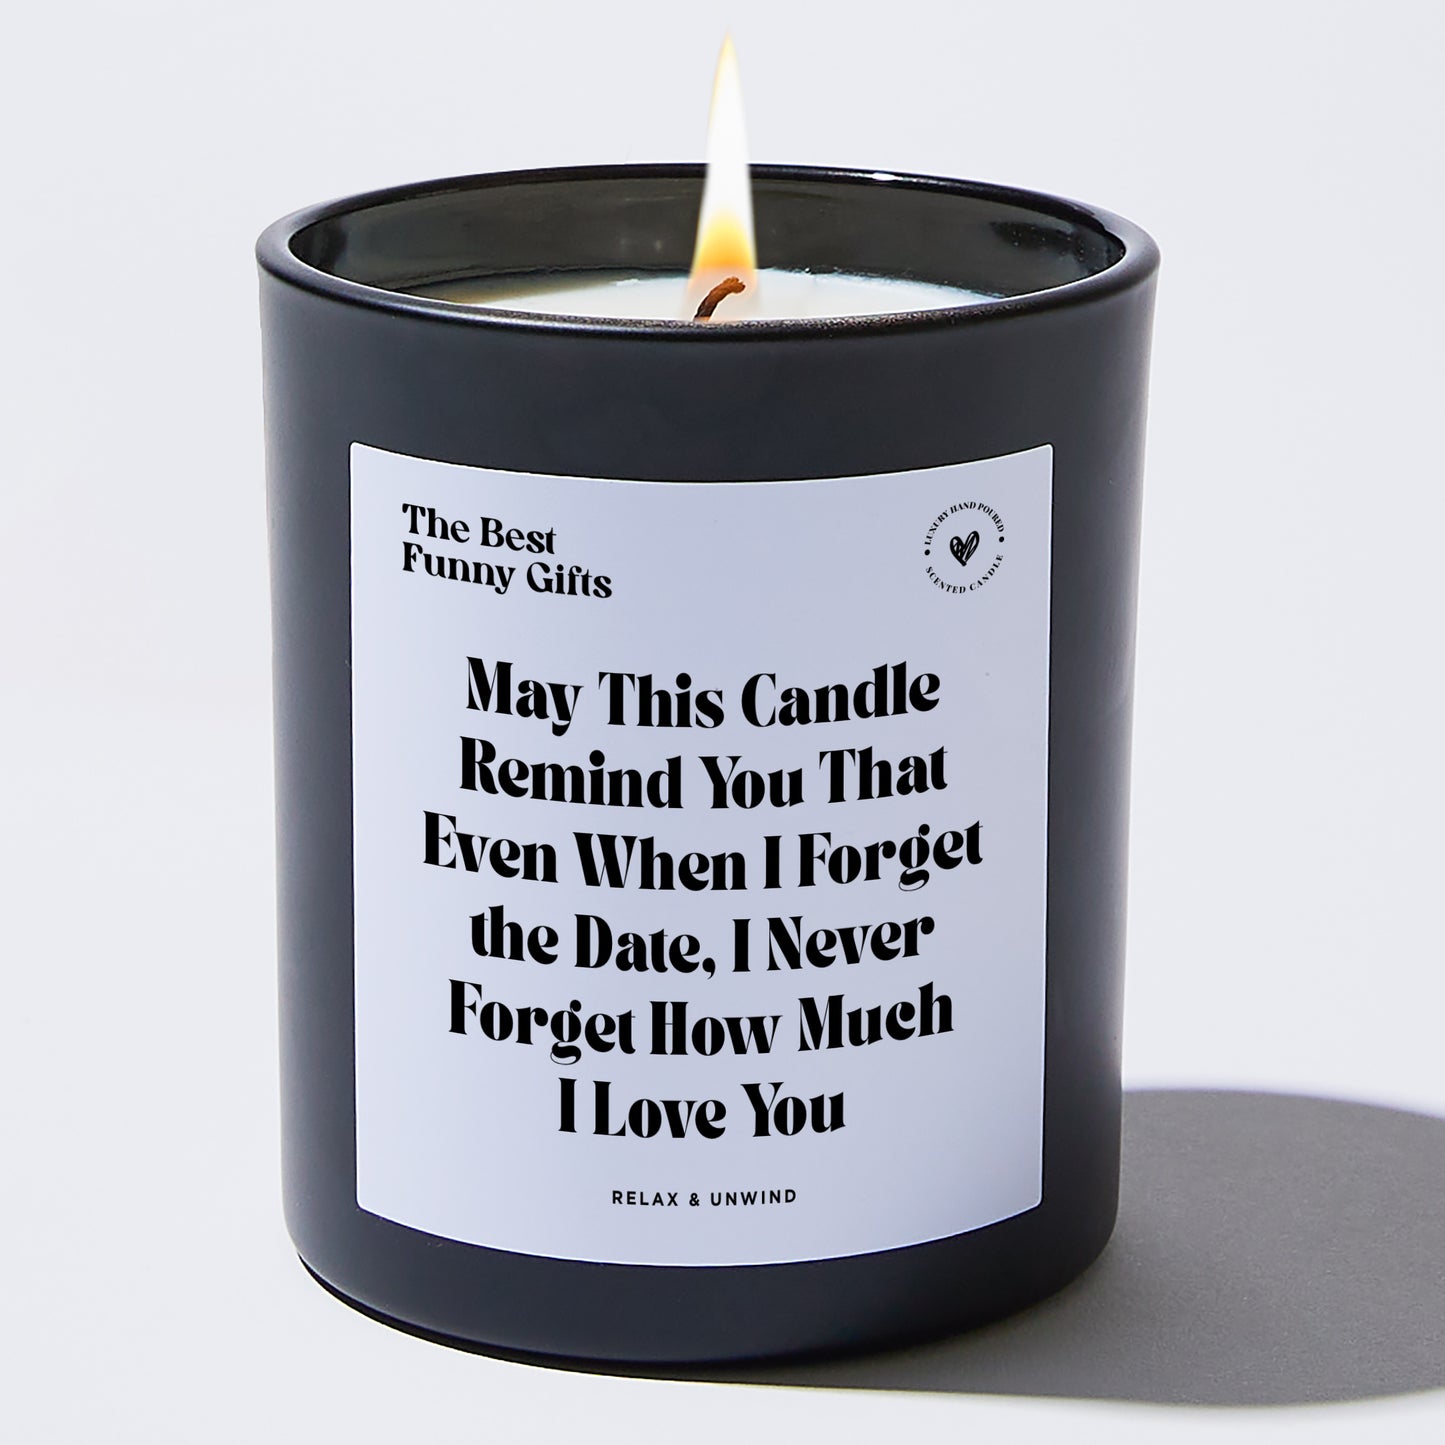 Anniversary May This Candle Remind You That Even When I Forget the Date, I Never Forget How Much I Love You - The Best Funny Gifts